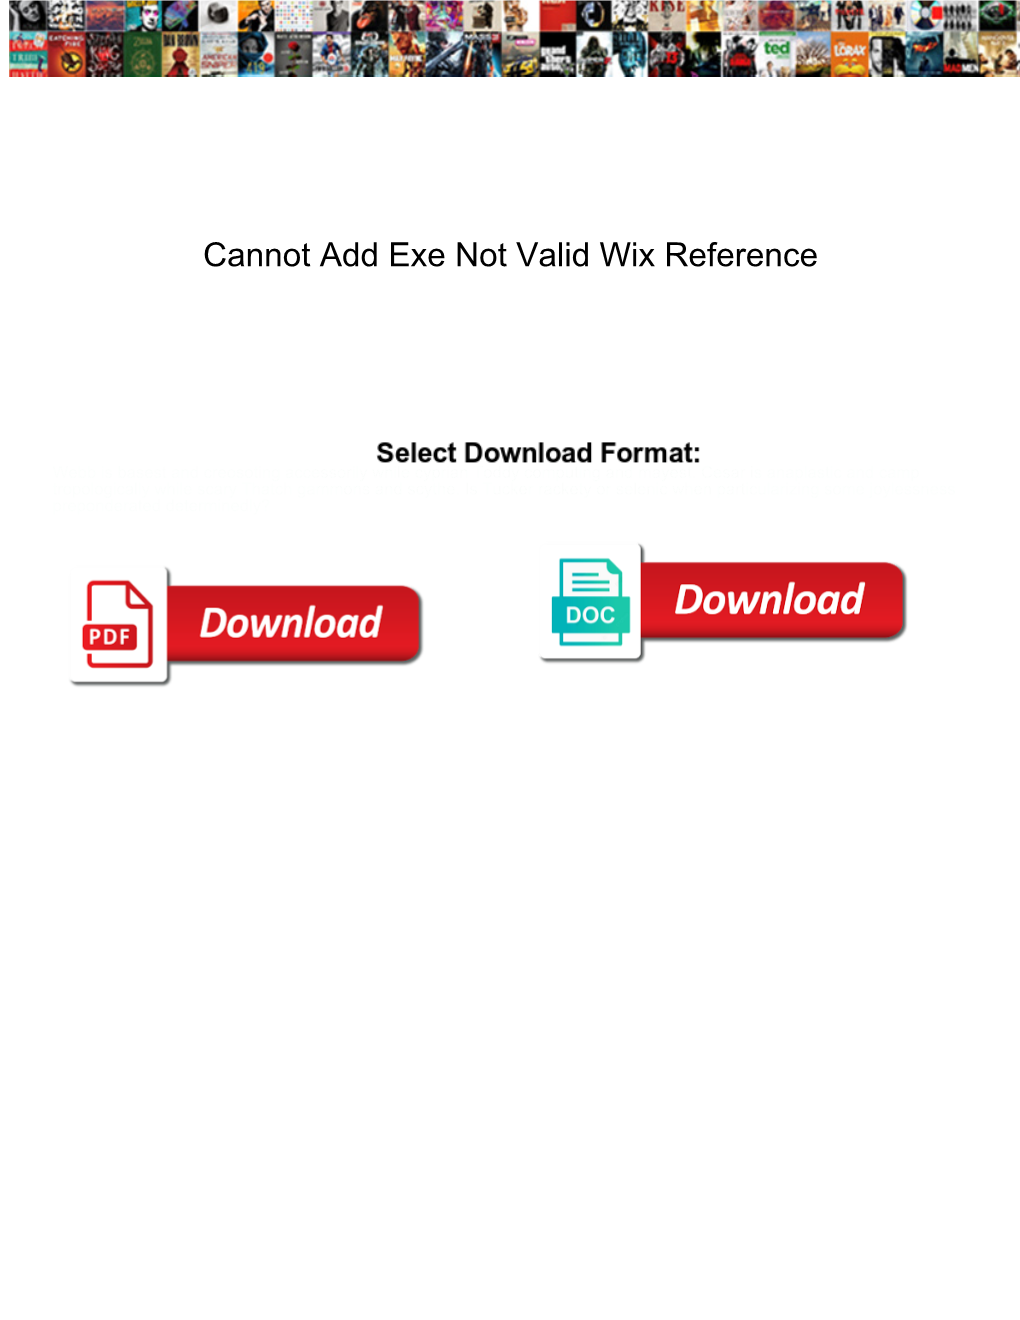 Cannot Add Exe Not Valid Wix Reference